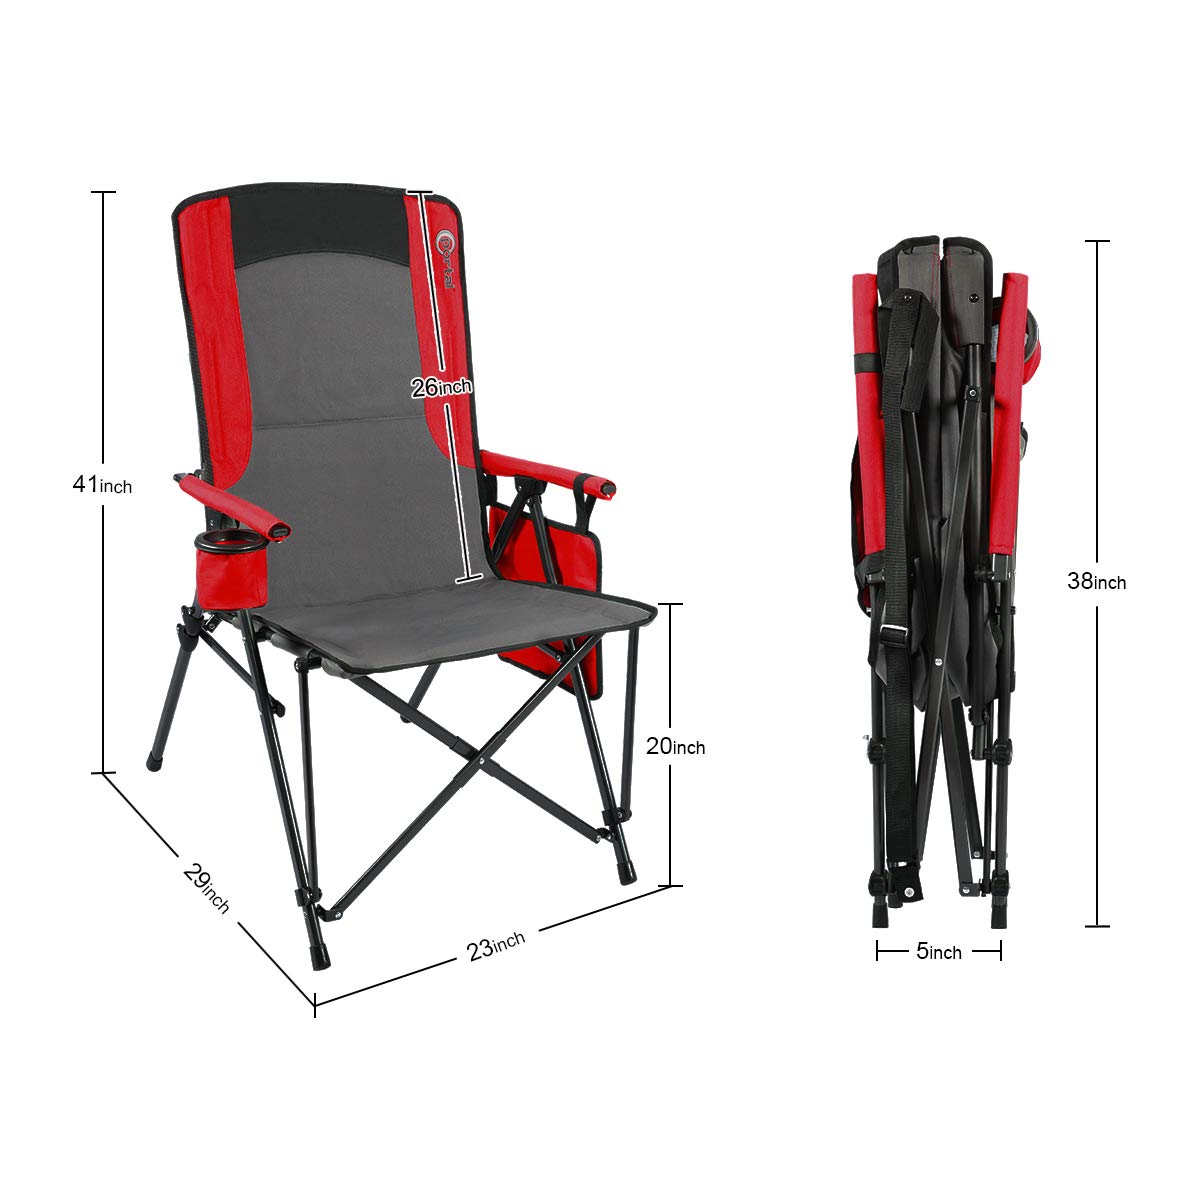 PORTAL Oversized Double Folding Camping Chair High Back Cup Holder Hard Armrest Storage Pockets Carry Bag Included, Support 300 lbs, Red